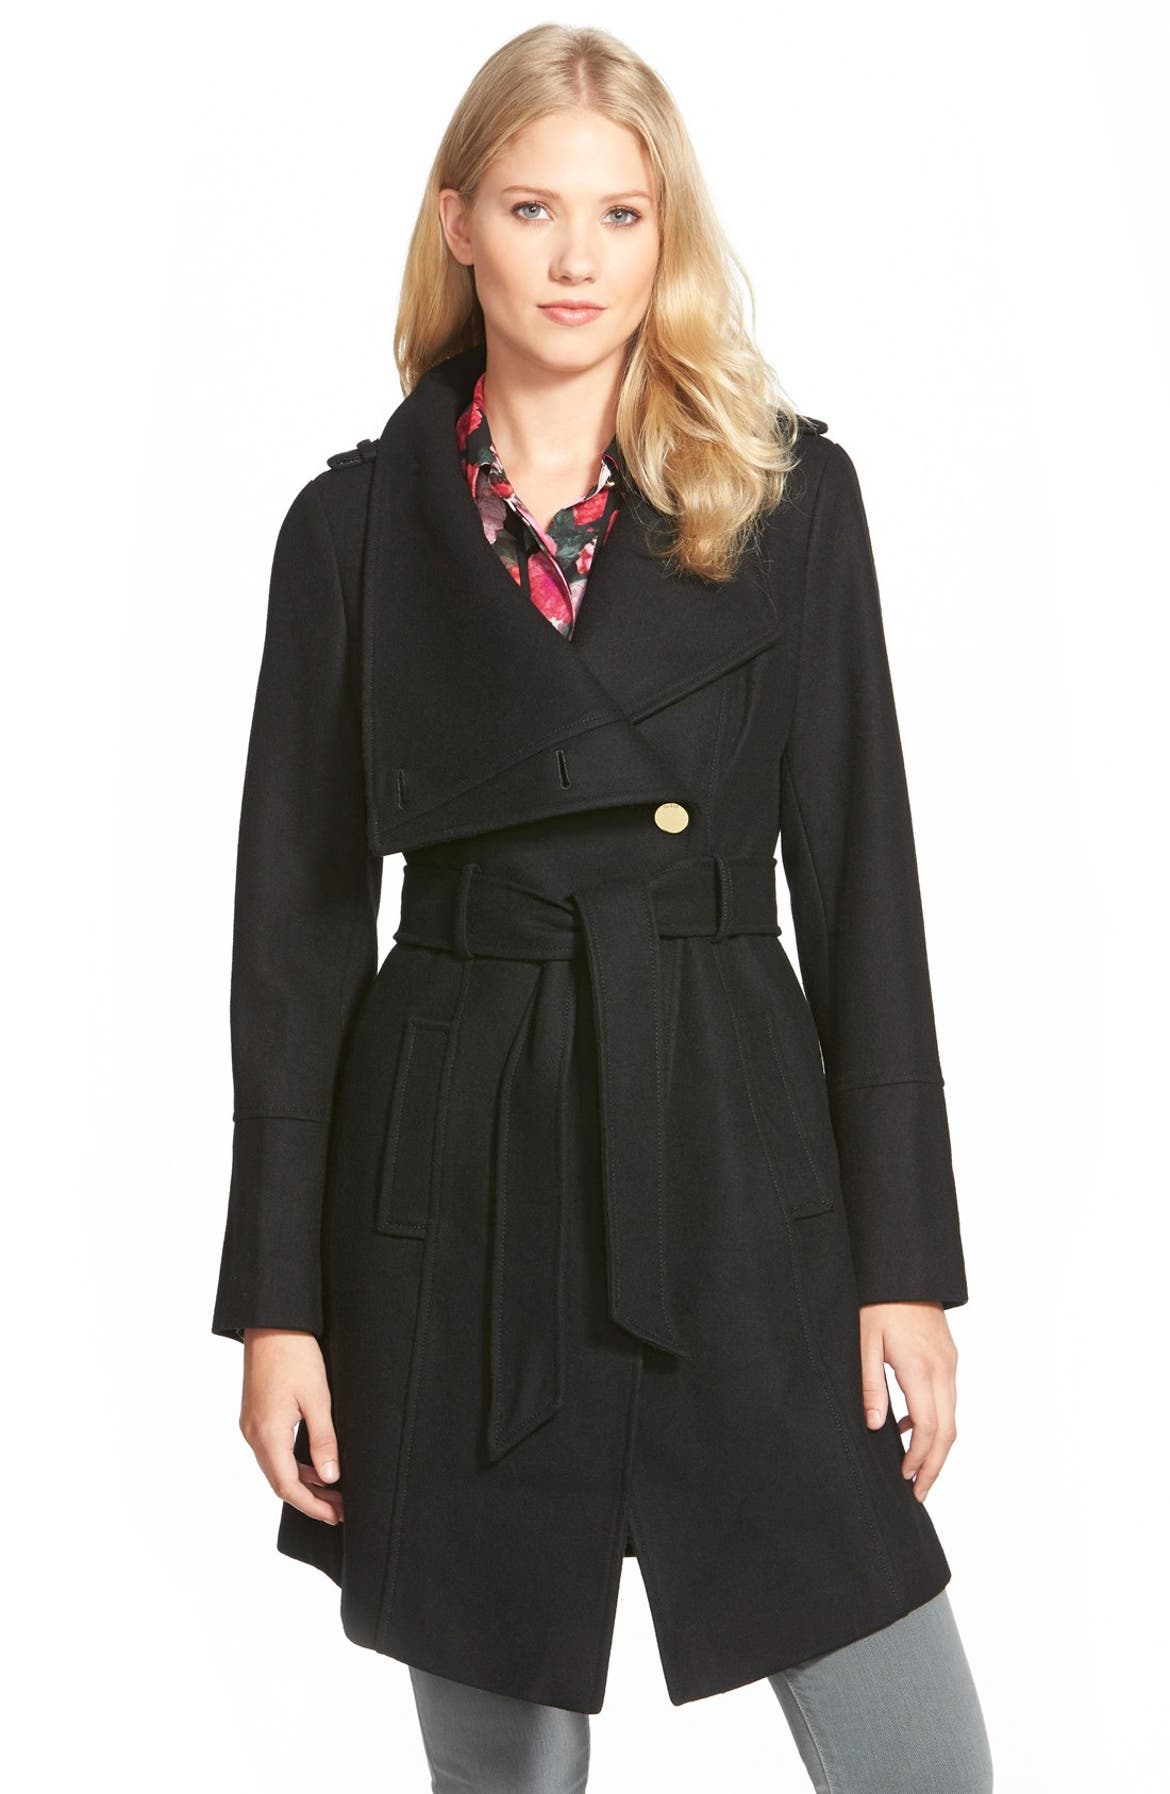 GUESS Belted Asymmetrical Wool Blend Trench Coat | Nordstrom